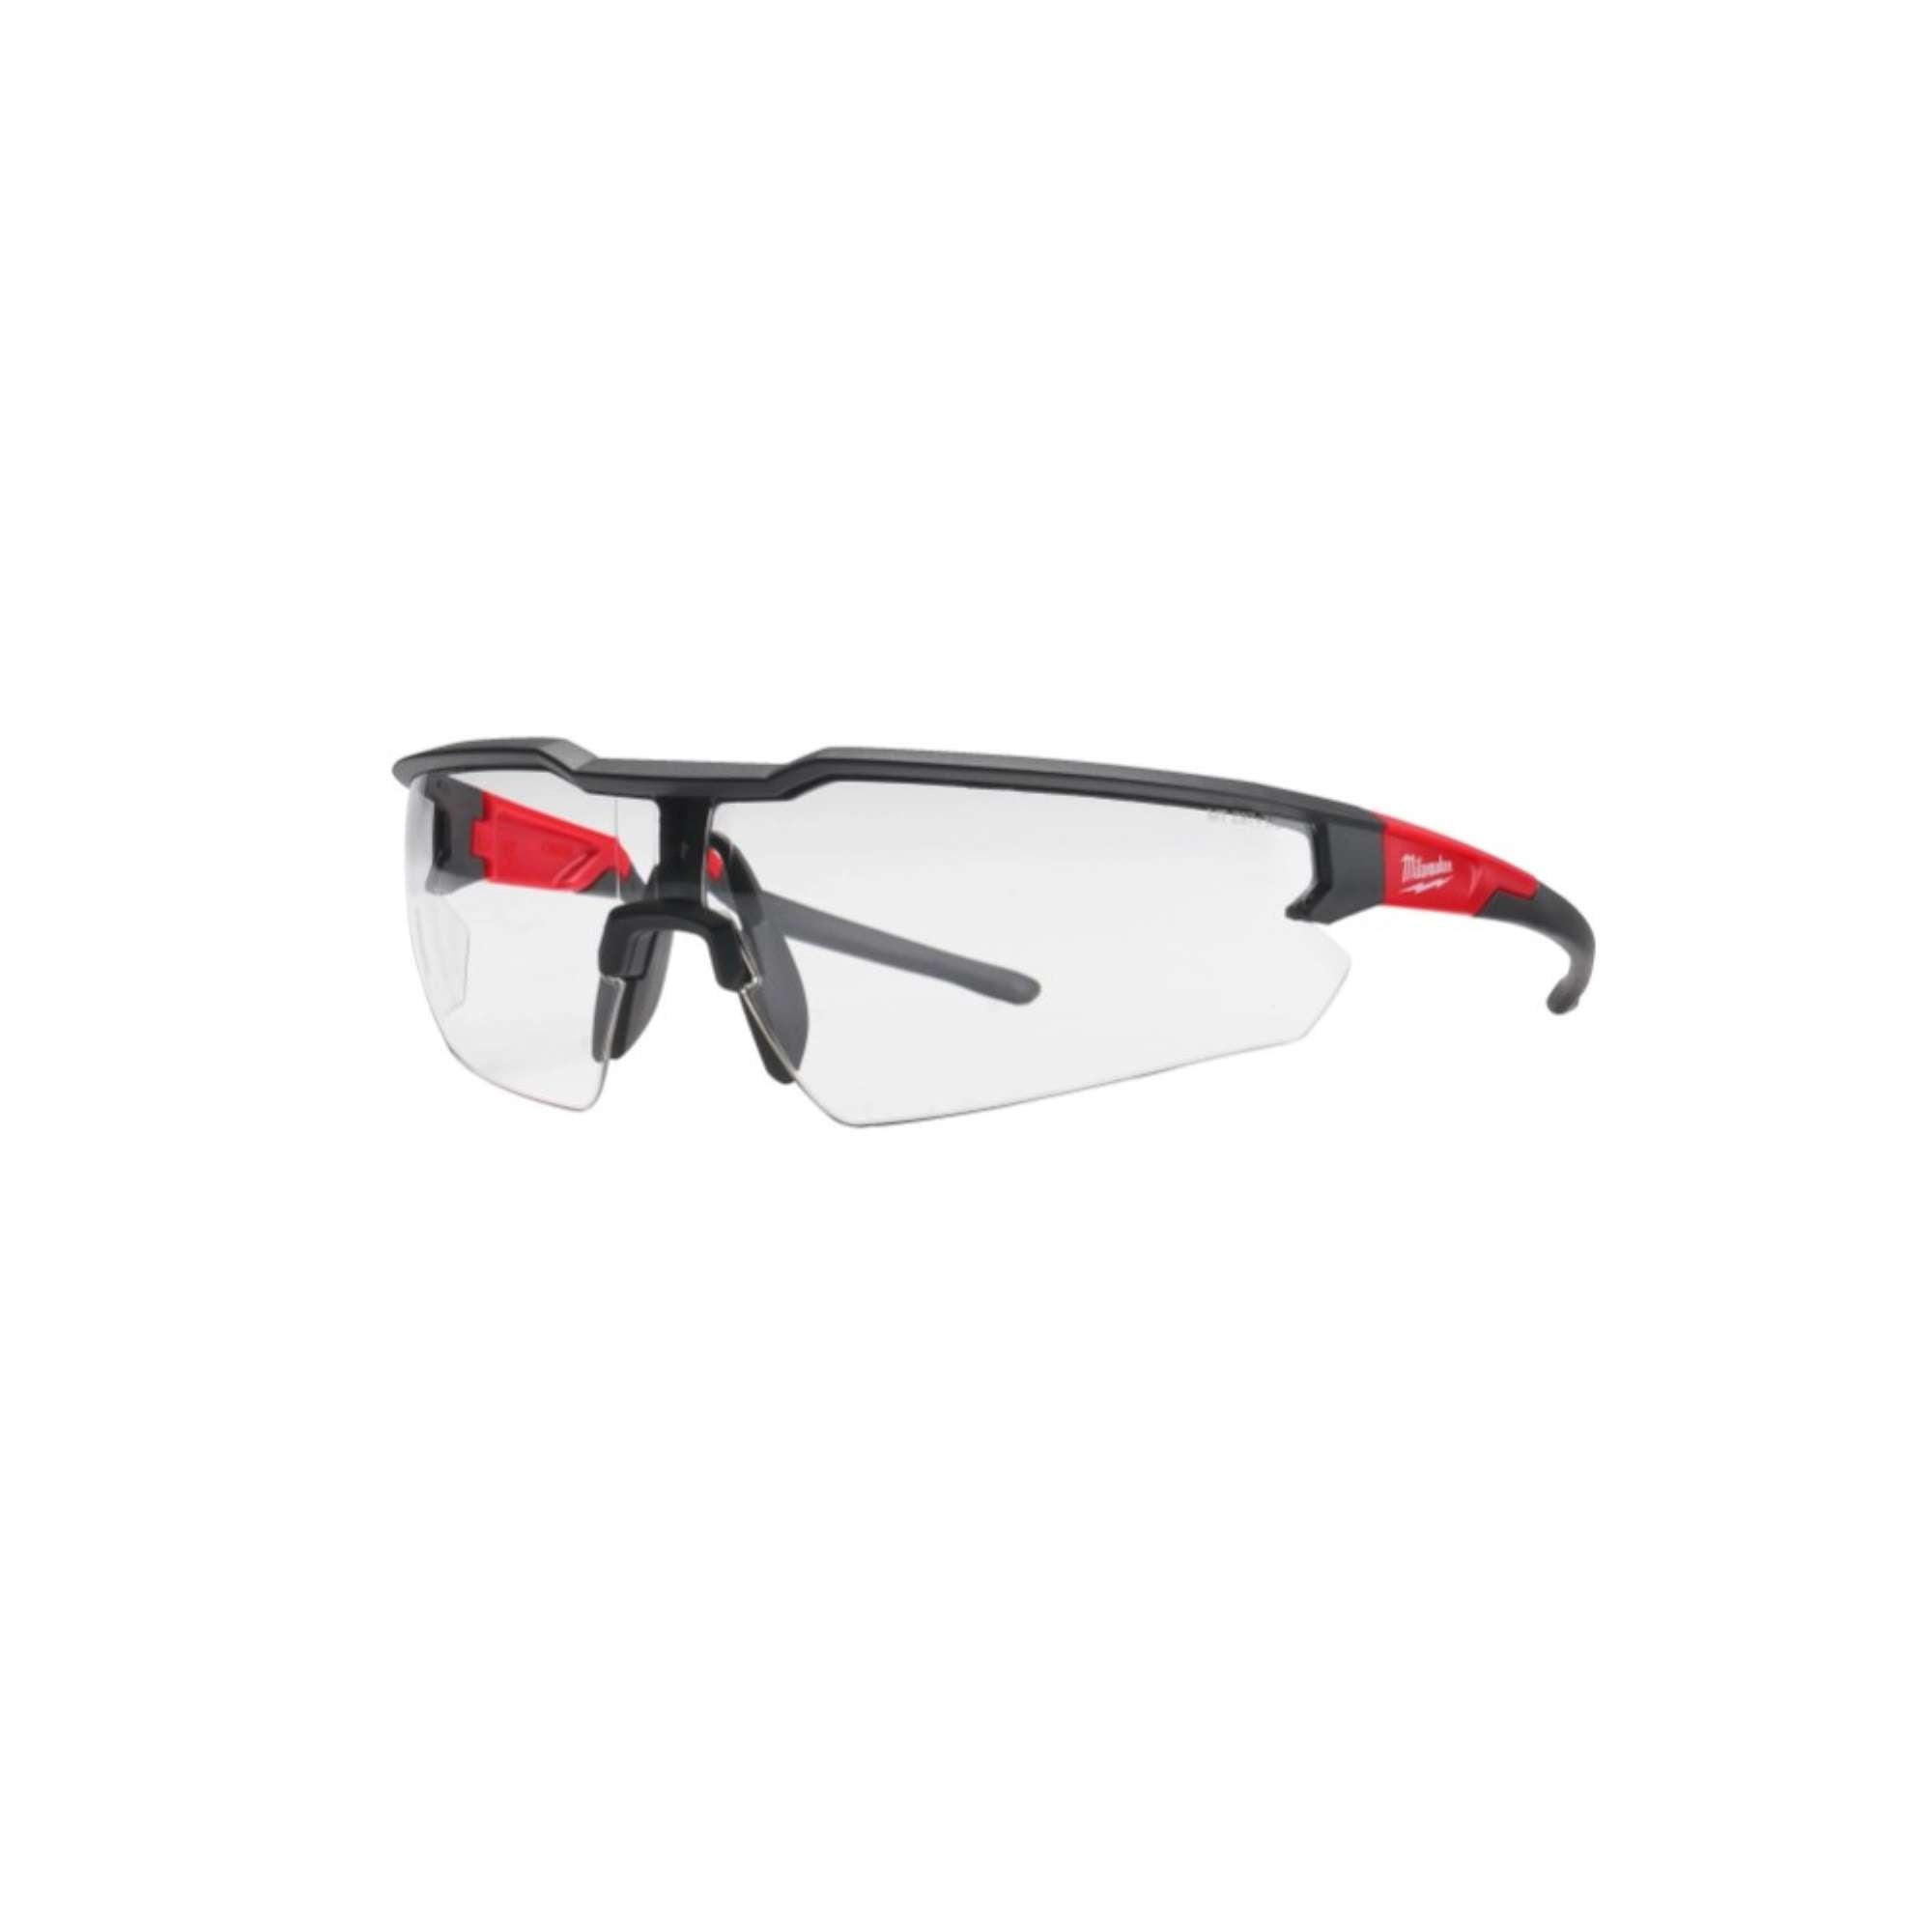 MILWAUKEE CLEAR LENS SAFETY GLASSES 4932478763